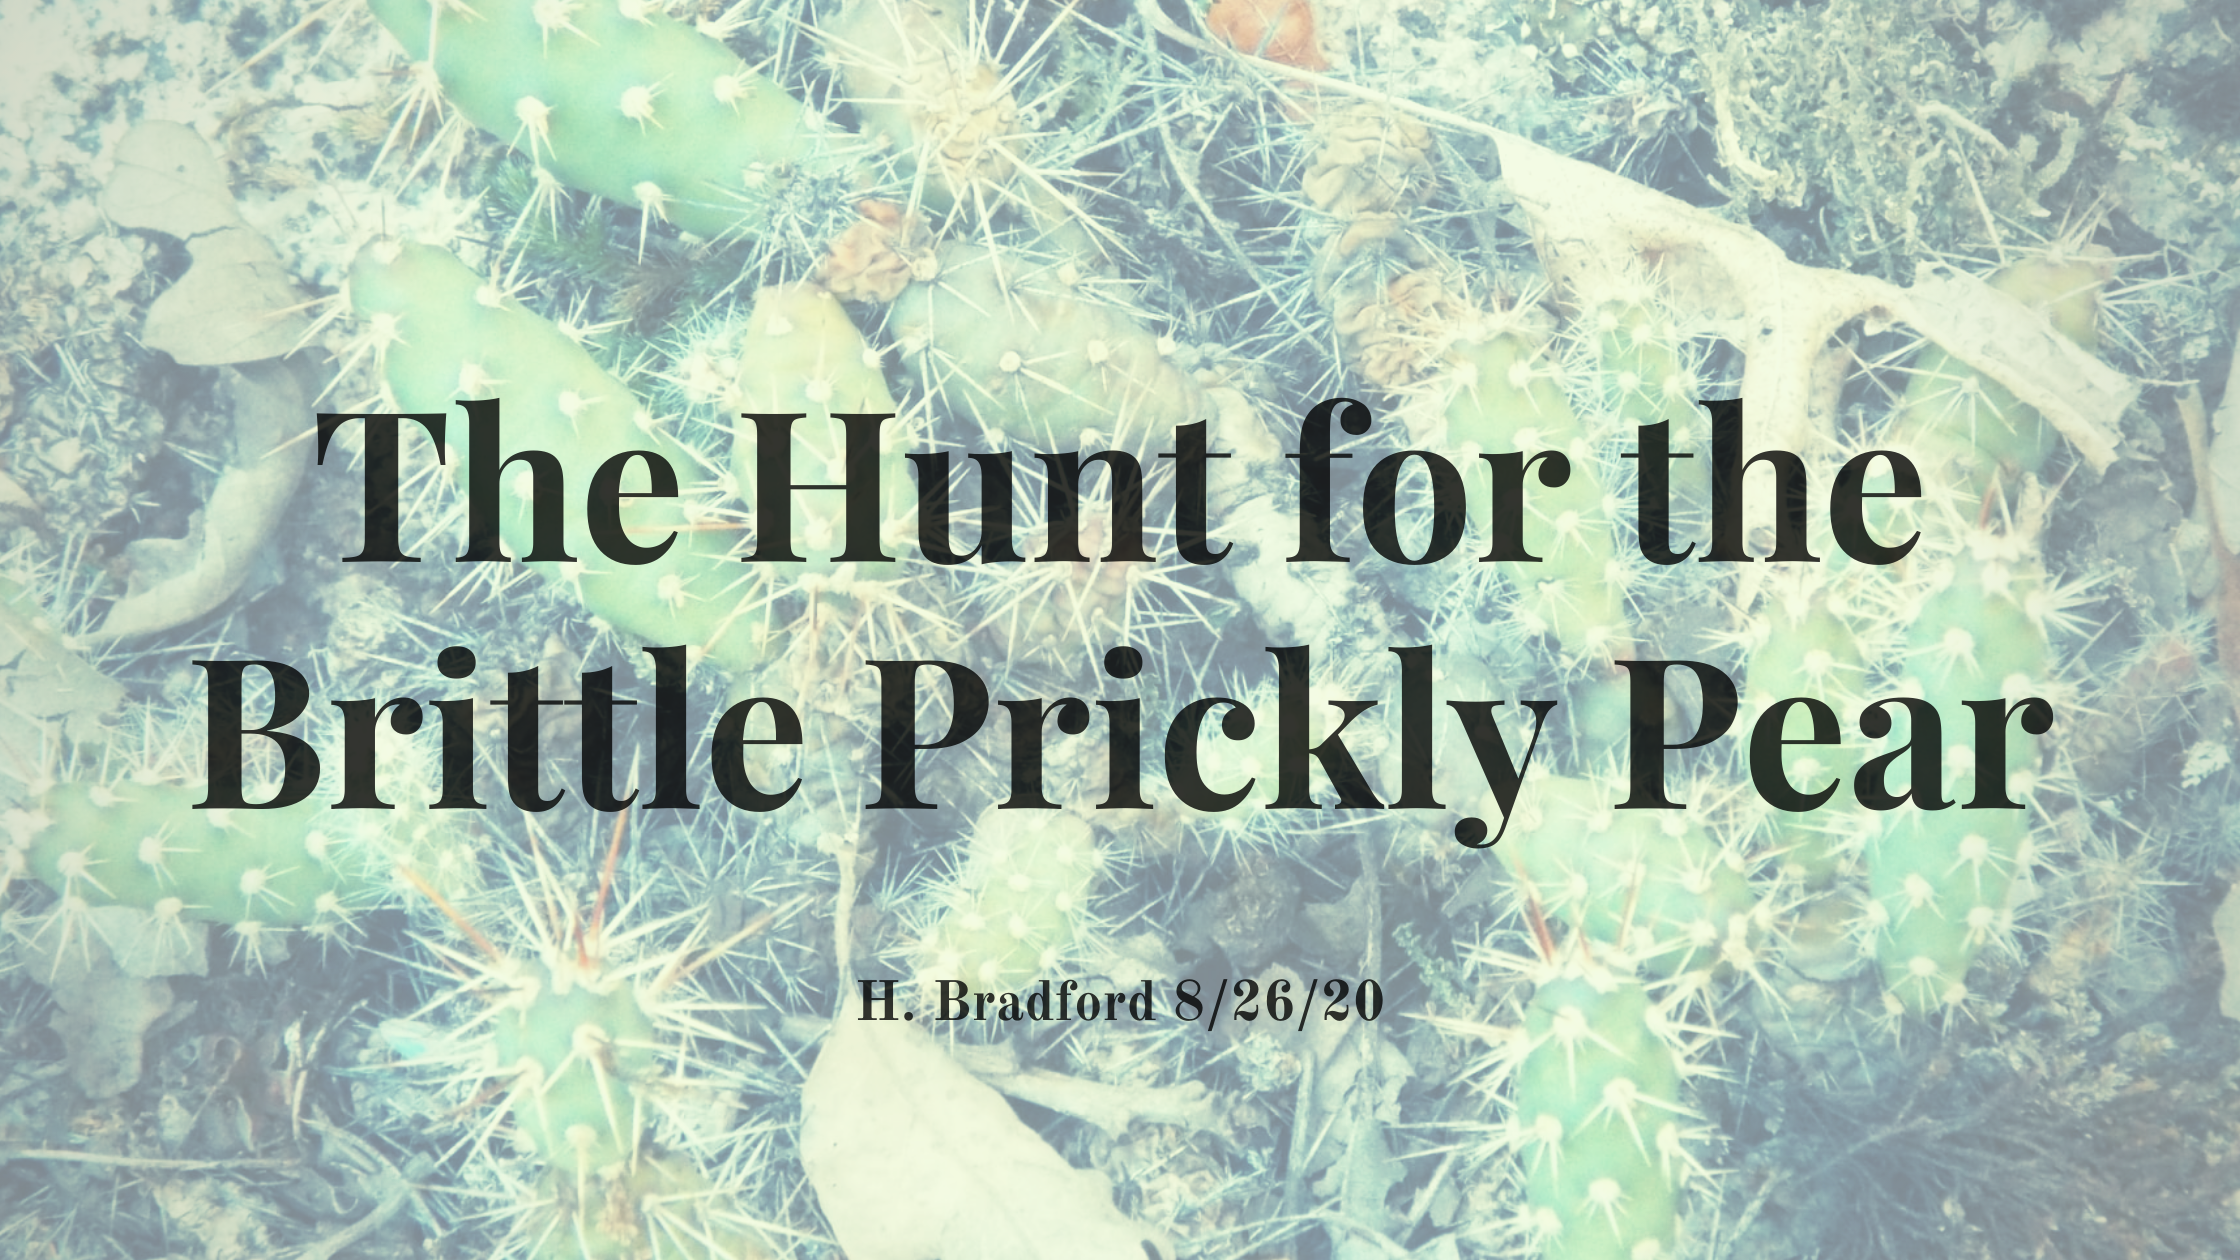 The Hunt for the Brittle Prickly Pear